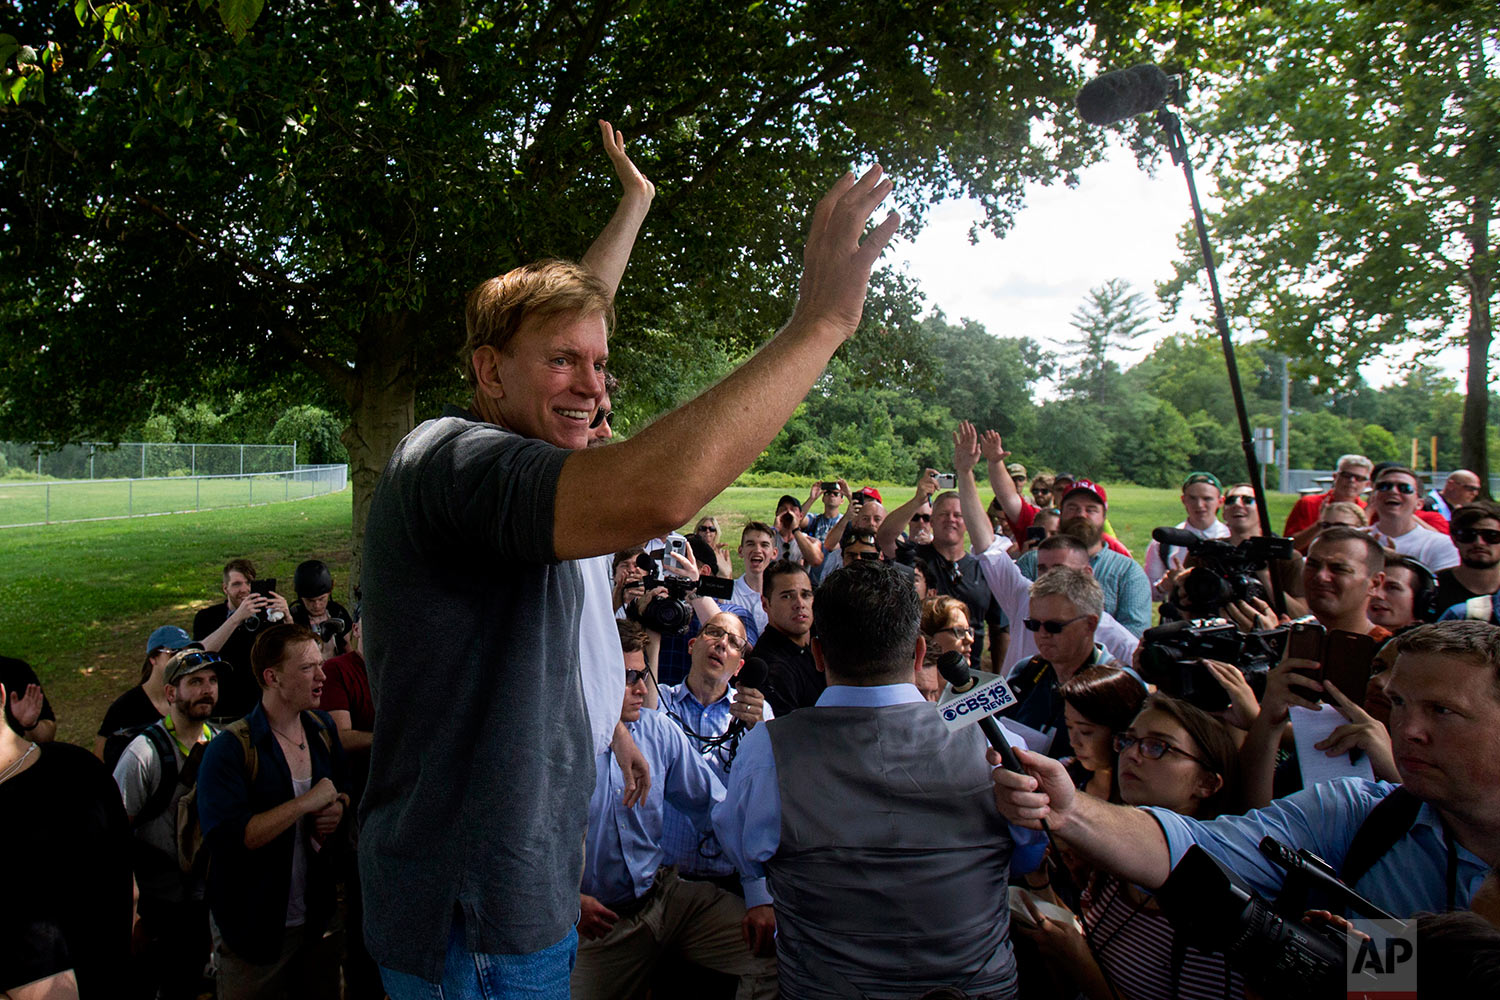  Former Louisiana State Representative David Duke arrives to give remarks after a white nationalist protest was declared an unlawful assembly, Saturday, Aug. 12, 2017, in Charlottesville, Va.  (Shaban Athuman/Richmond Times-Dispatch via AP) 